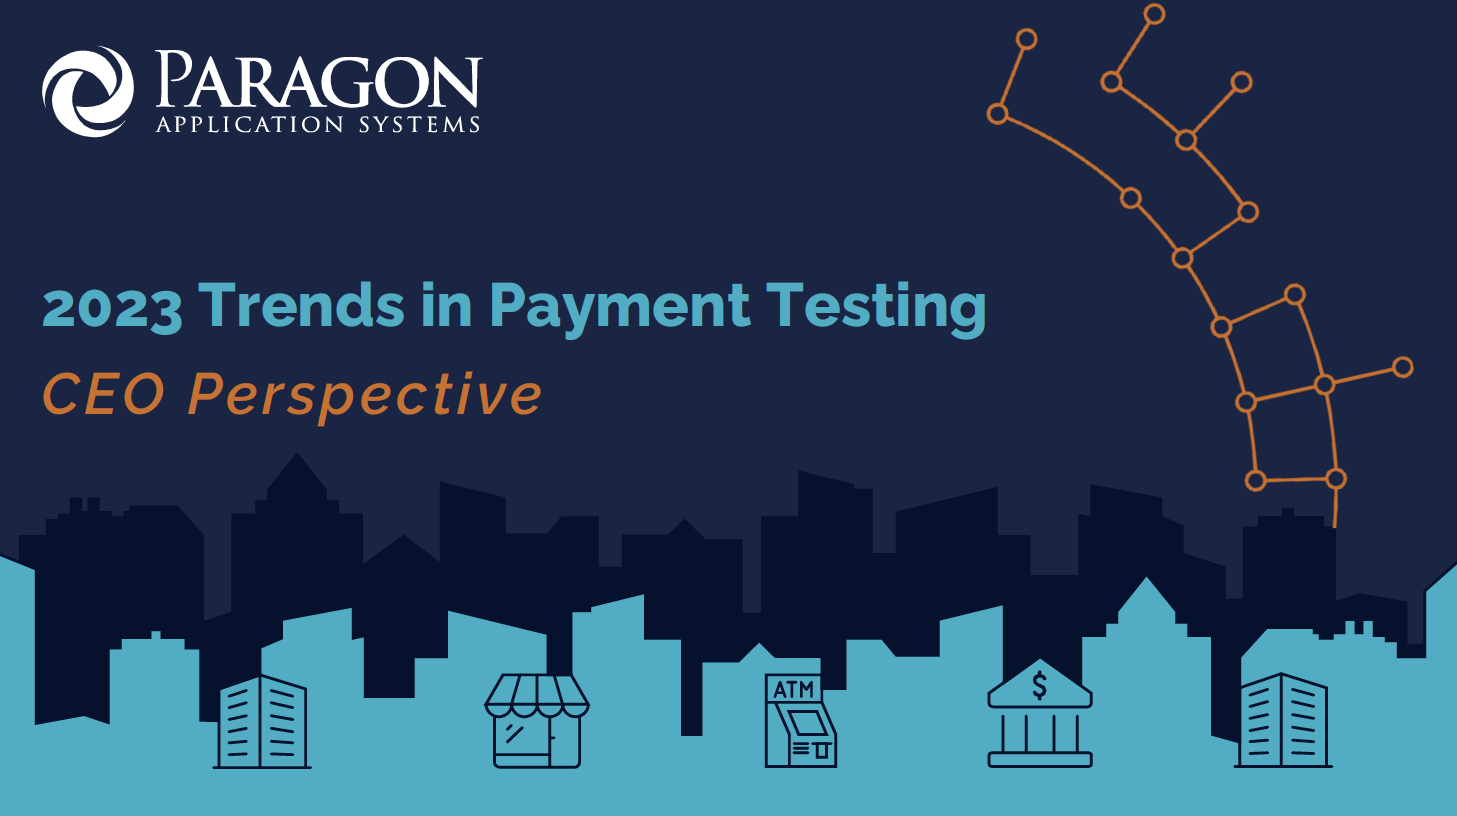 2023 Trends in Payment Testing